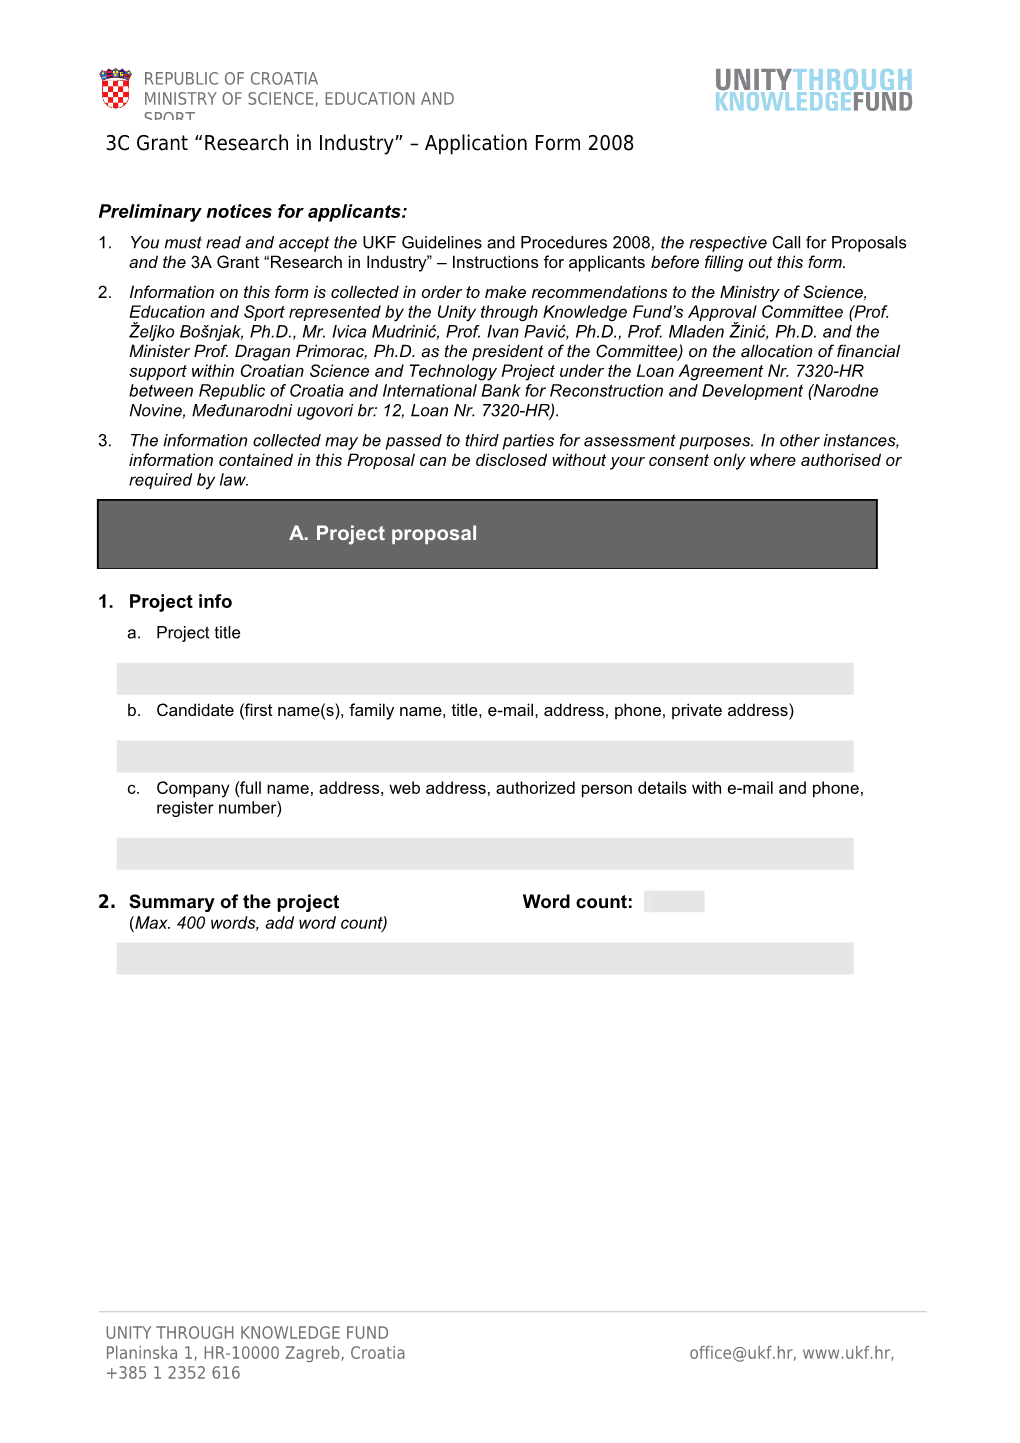 3C Grant Research in Industry Application Form 2008